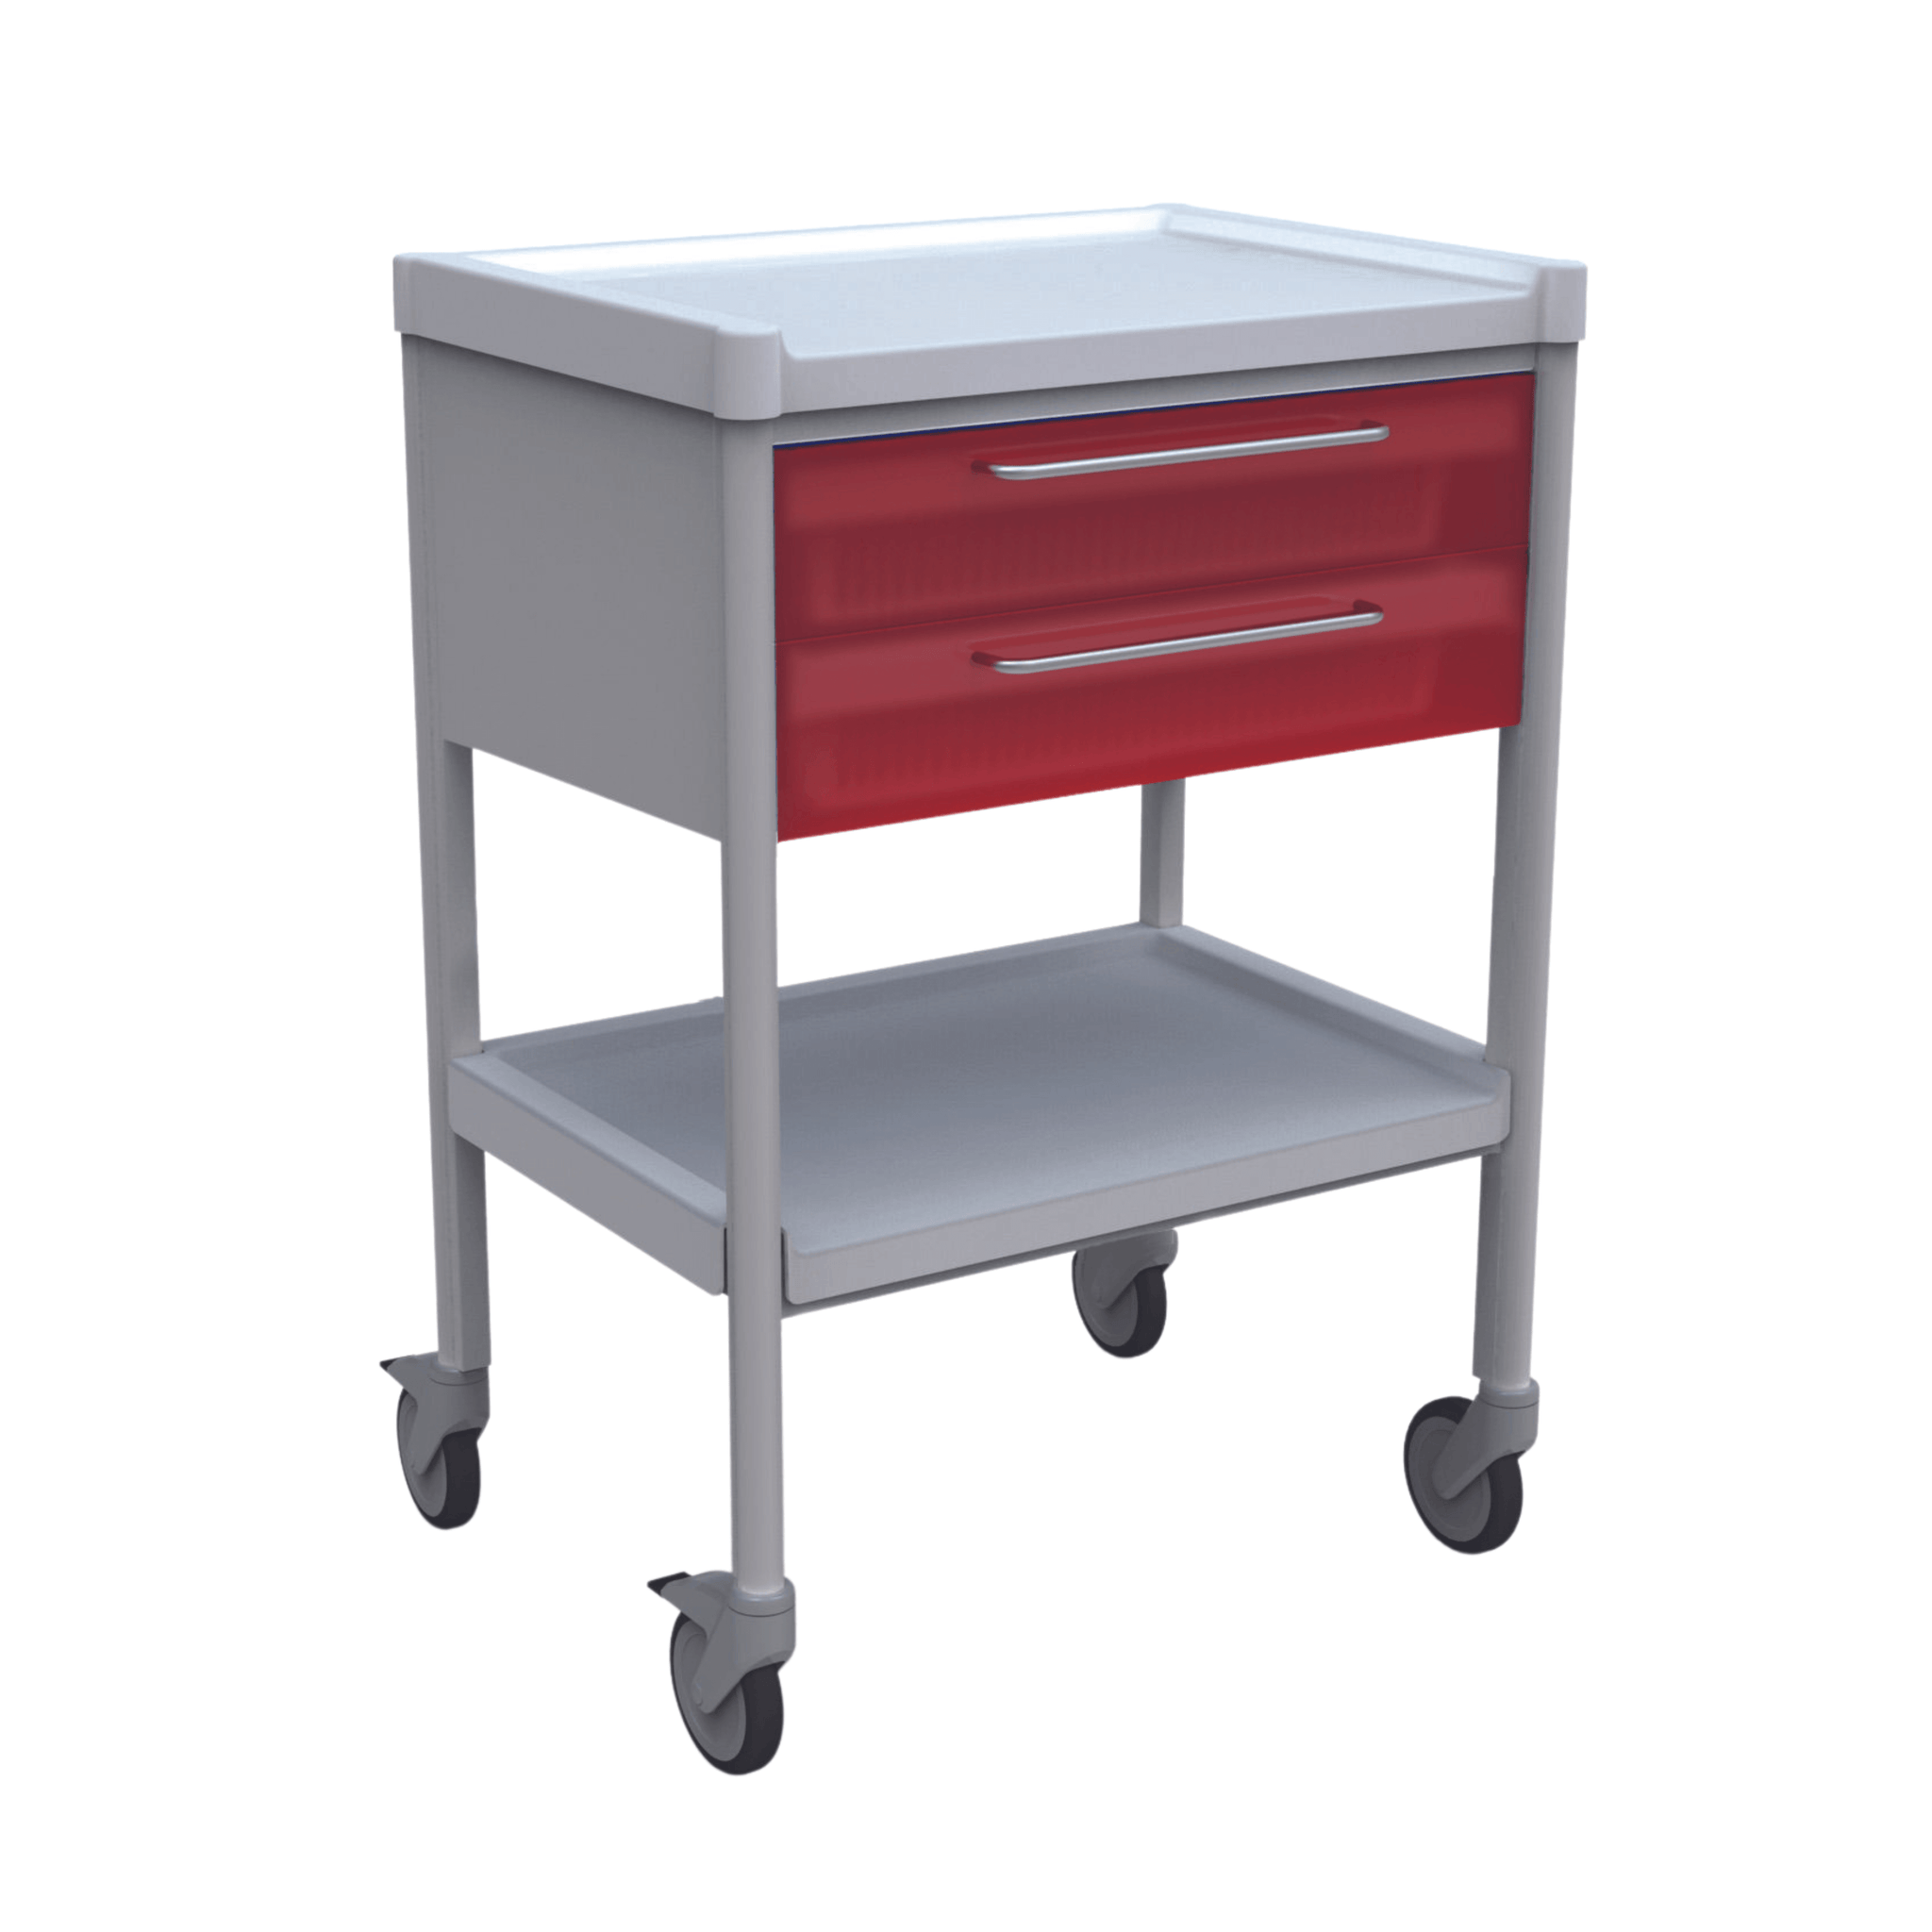 Spectra Cart - 2 Drawer, 700 X 500 X 1000 mm, Red